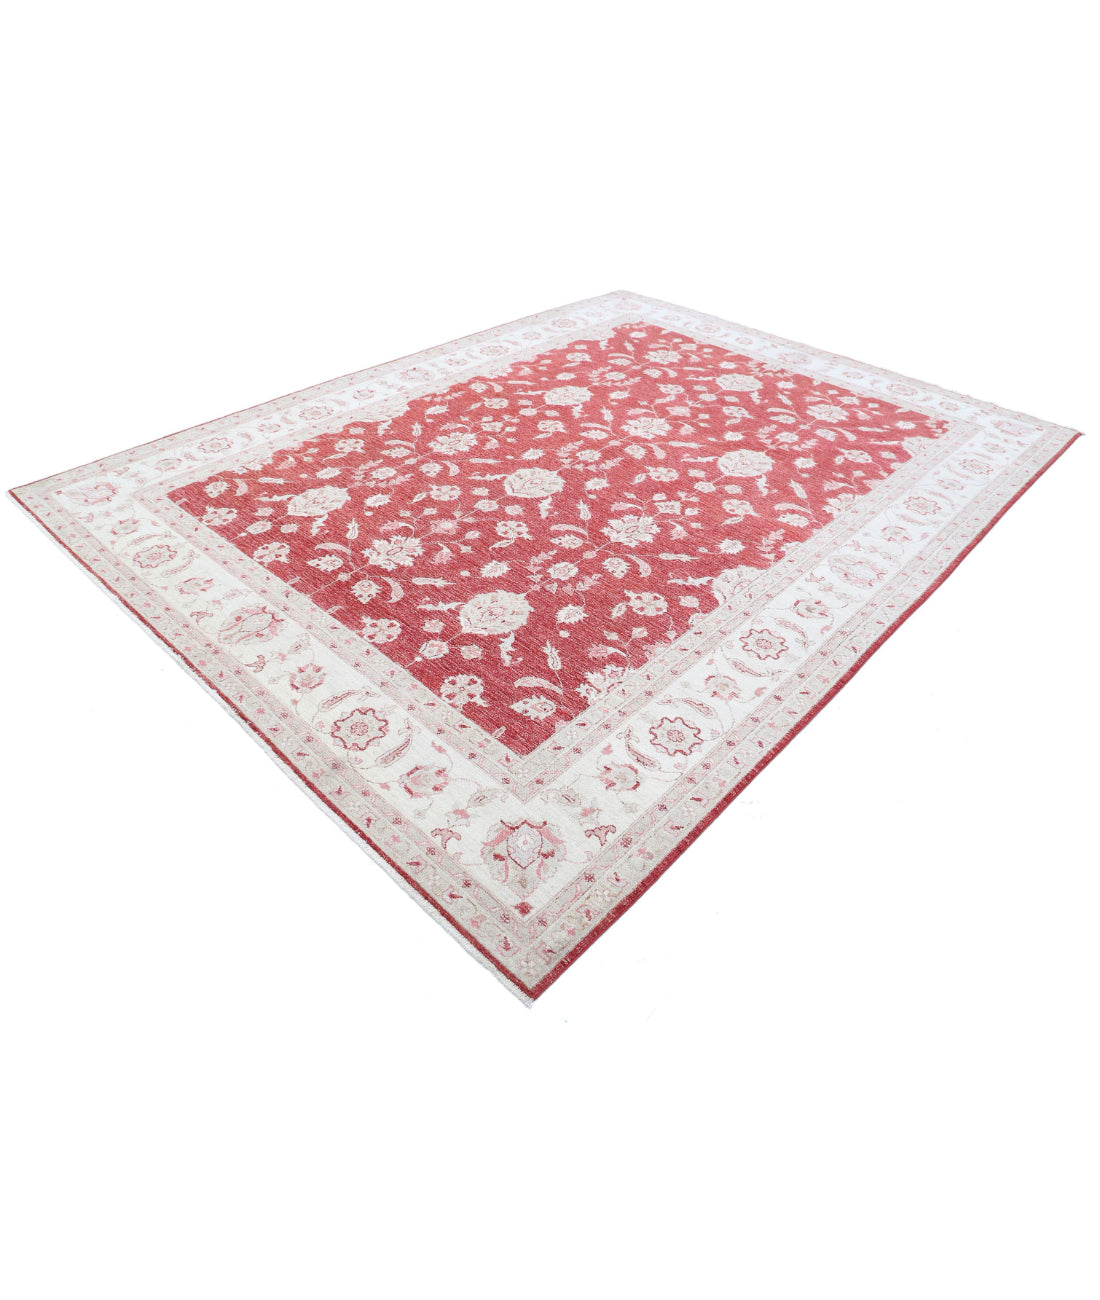 Ziegler 8'2'' X 10'11'' Hand-Knotted Wool Rug 8'2'' x 10'11'' (245 X 328) / Red / Ivory